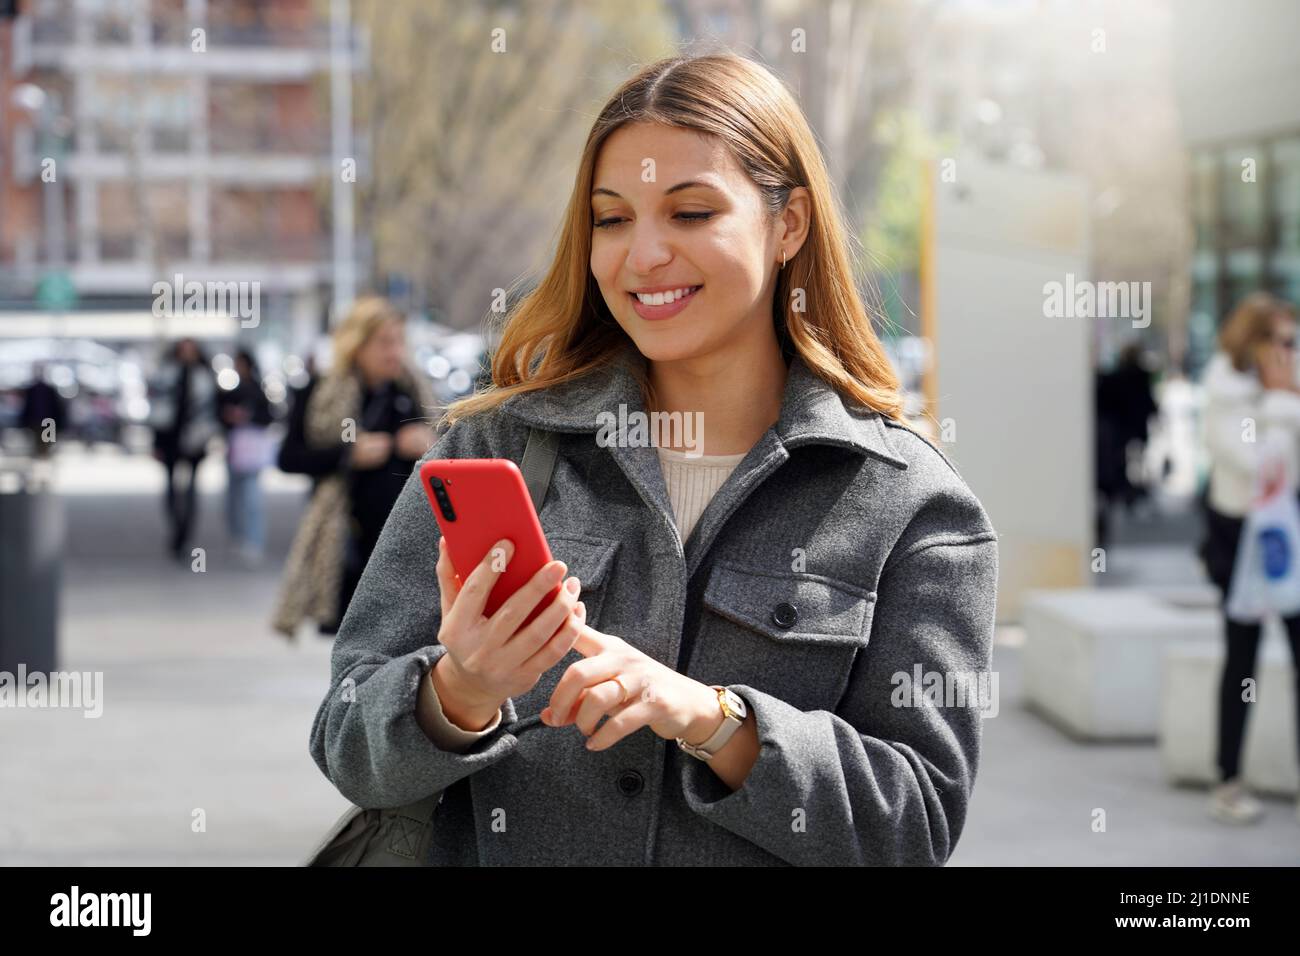 Pretty busy girl looking at mobile screen and smiling outside with blurred people on the background Stock Photo